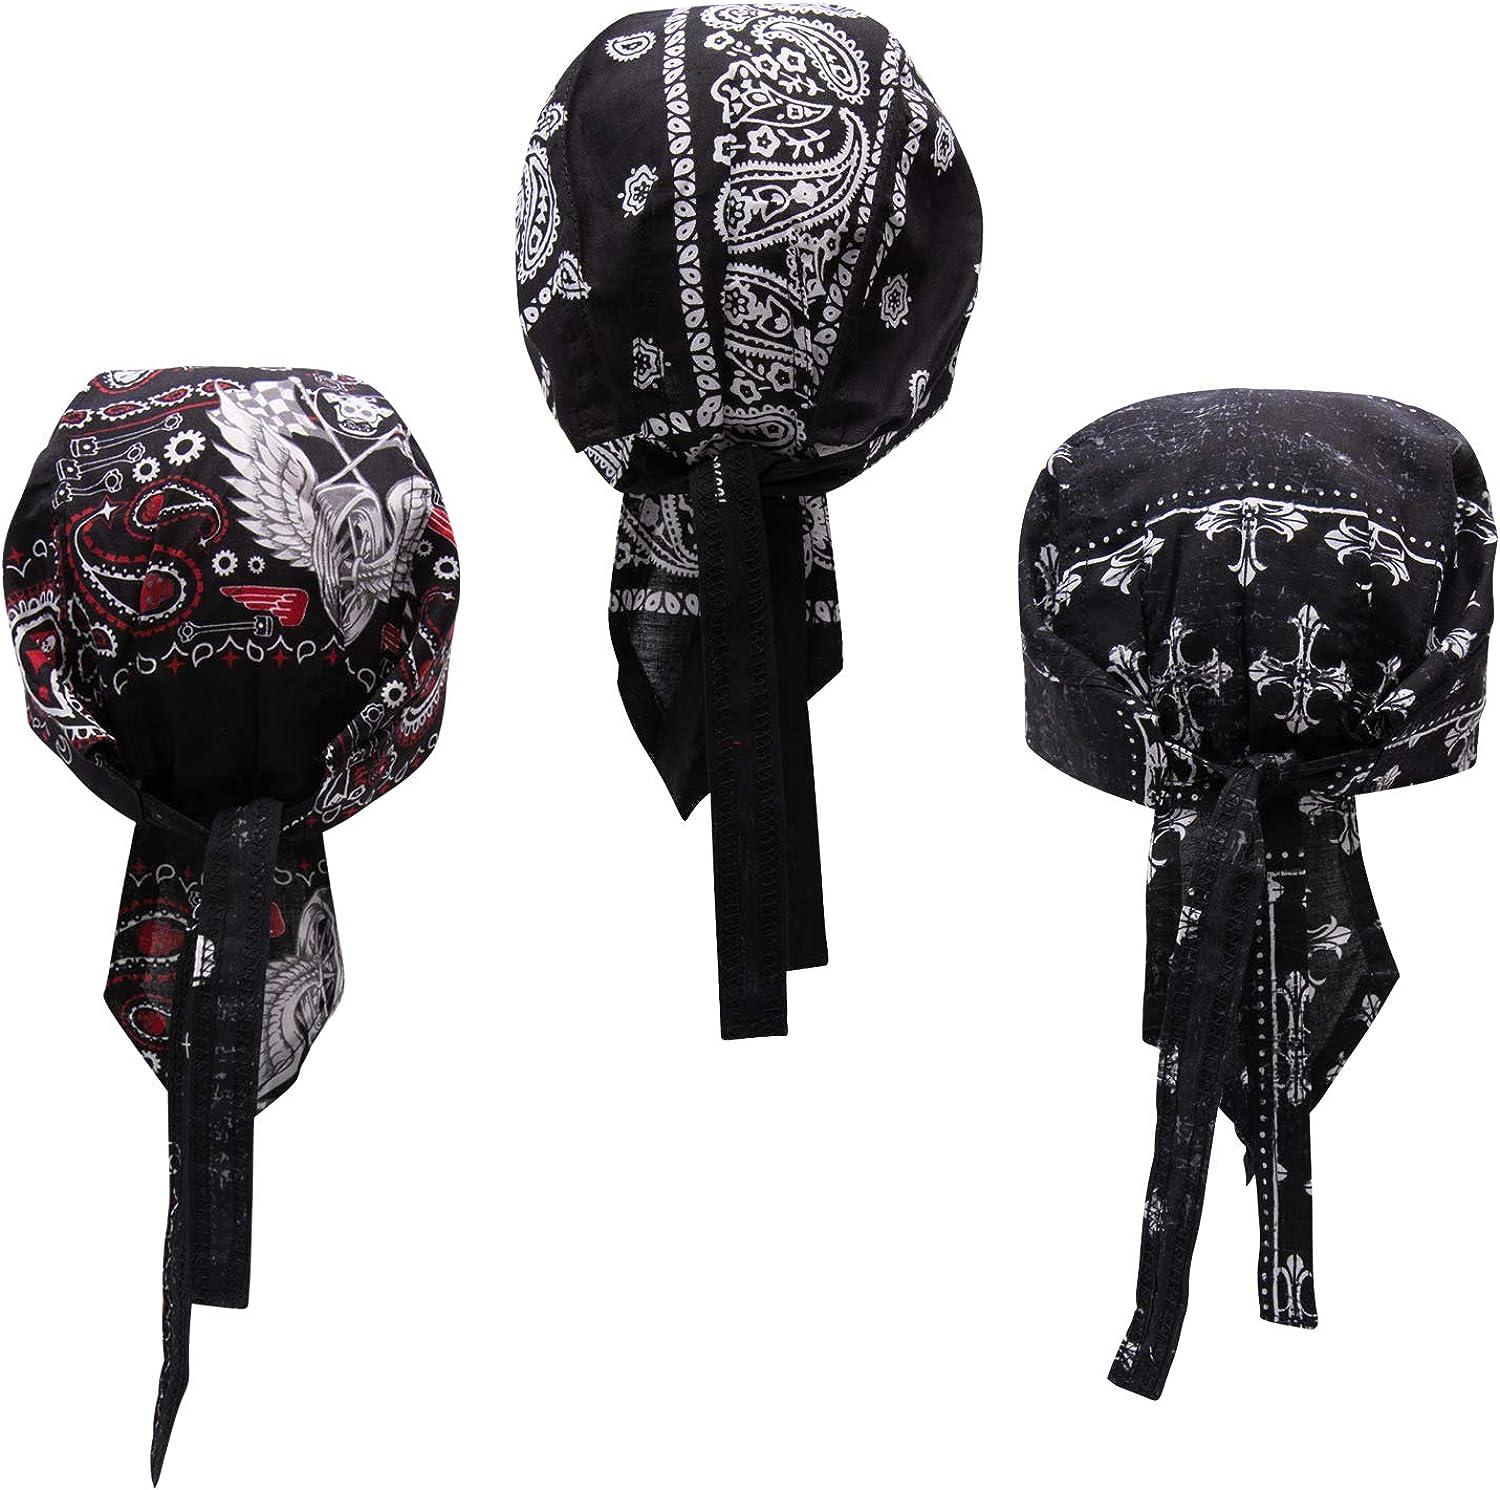 Elephant Brand Skull Caps 100% Cotton in Patterned and Plain Colors, Pack  of 3 Biker 2